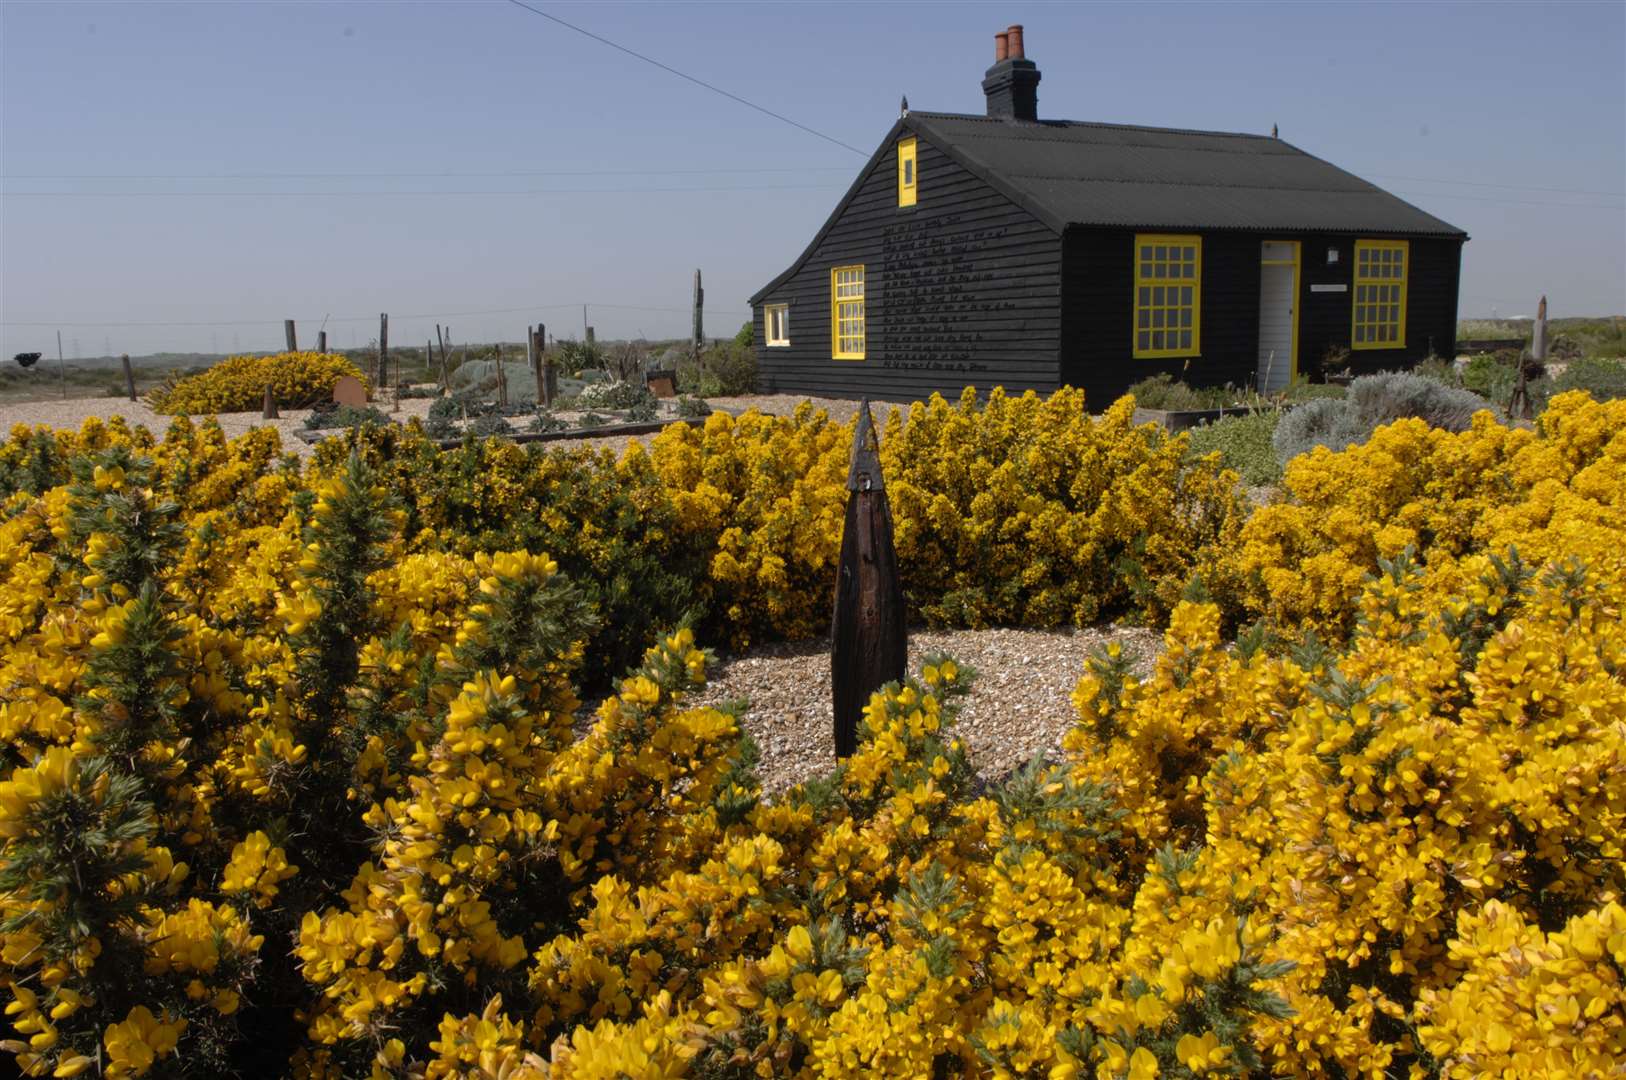 Prospect Cottage - The film producer/artist Derek Jarman's former home and garden on the shingle at Dungeness Picture: Gary Browne